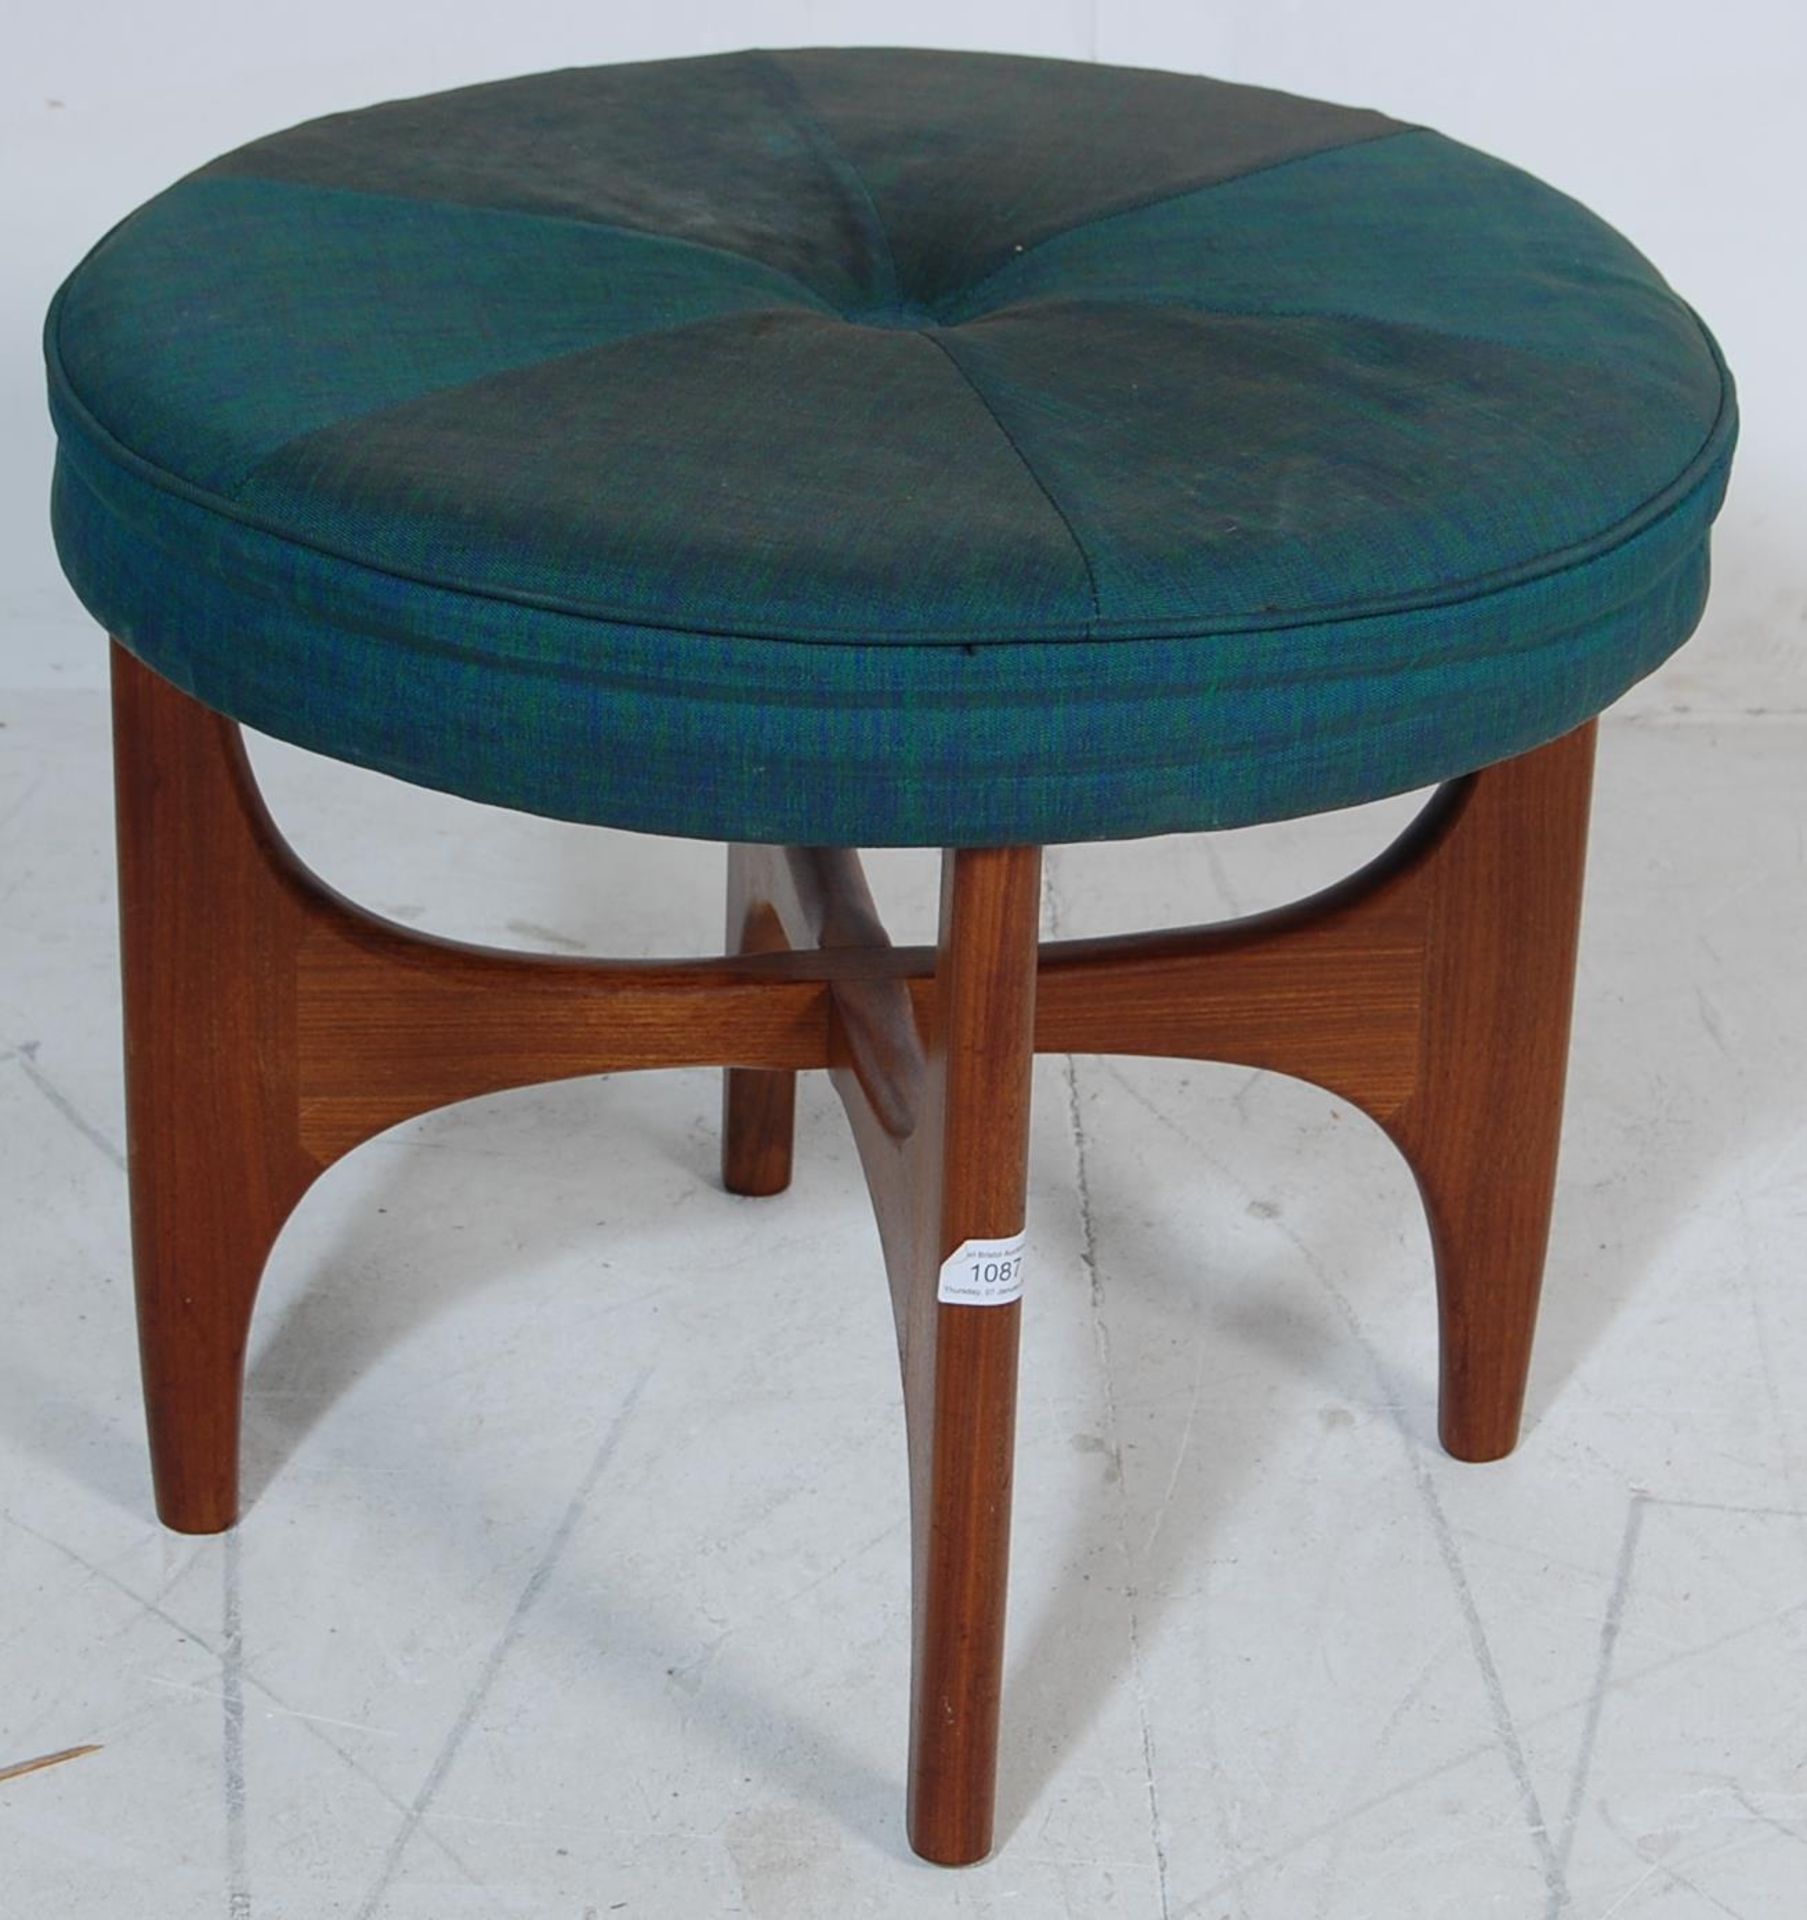 RETRO 1960’S G PLAN DRESSING TABLE STOOL WITH CIRCULAR SEAT - Image 2 of 4